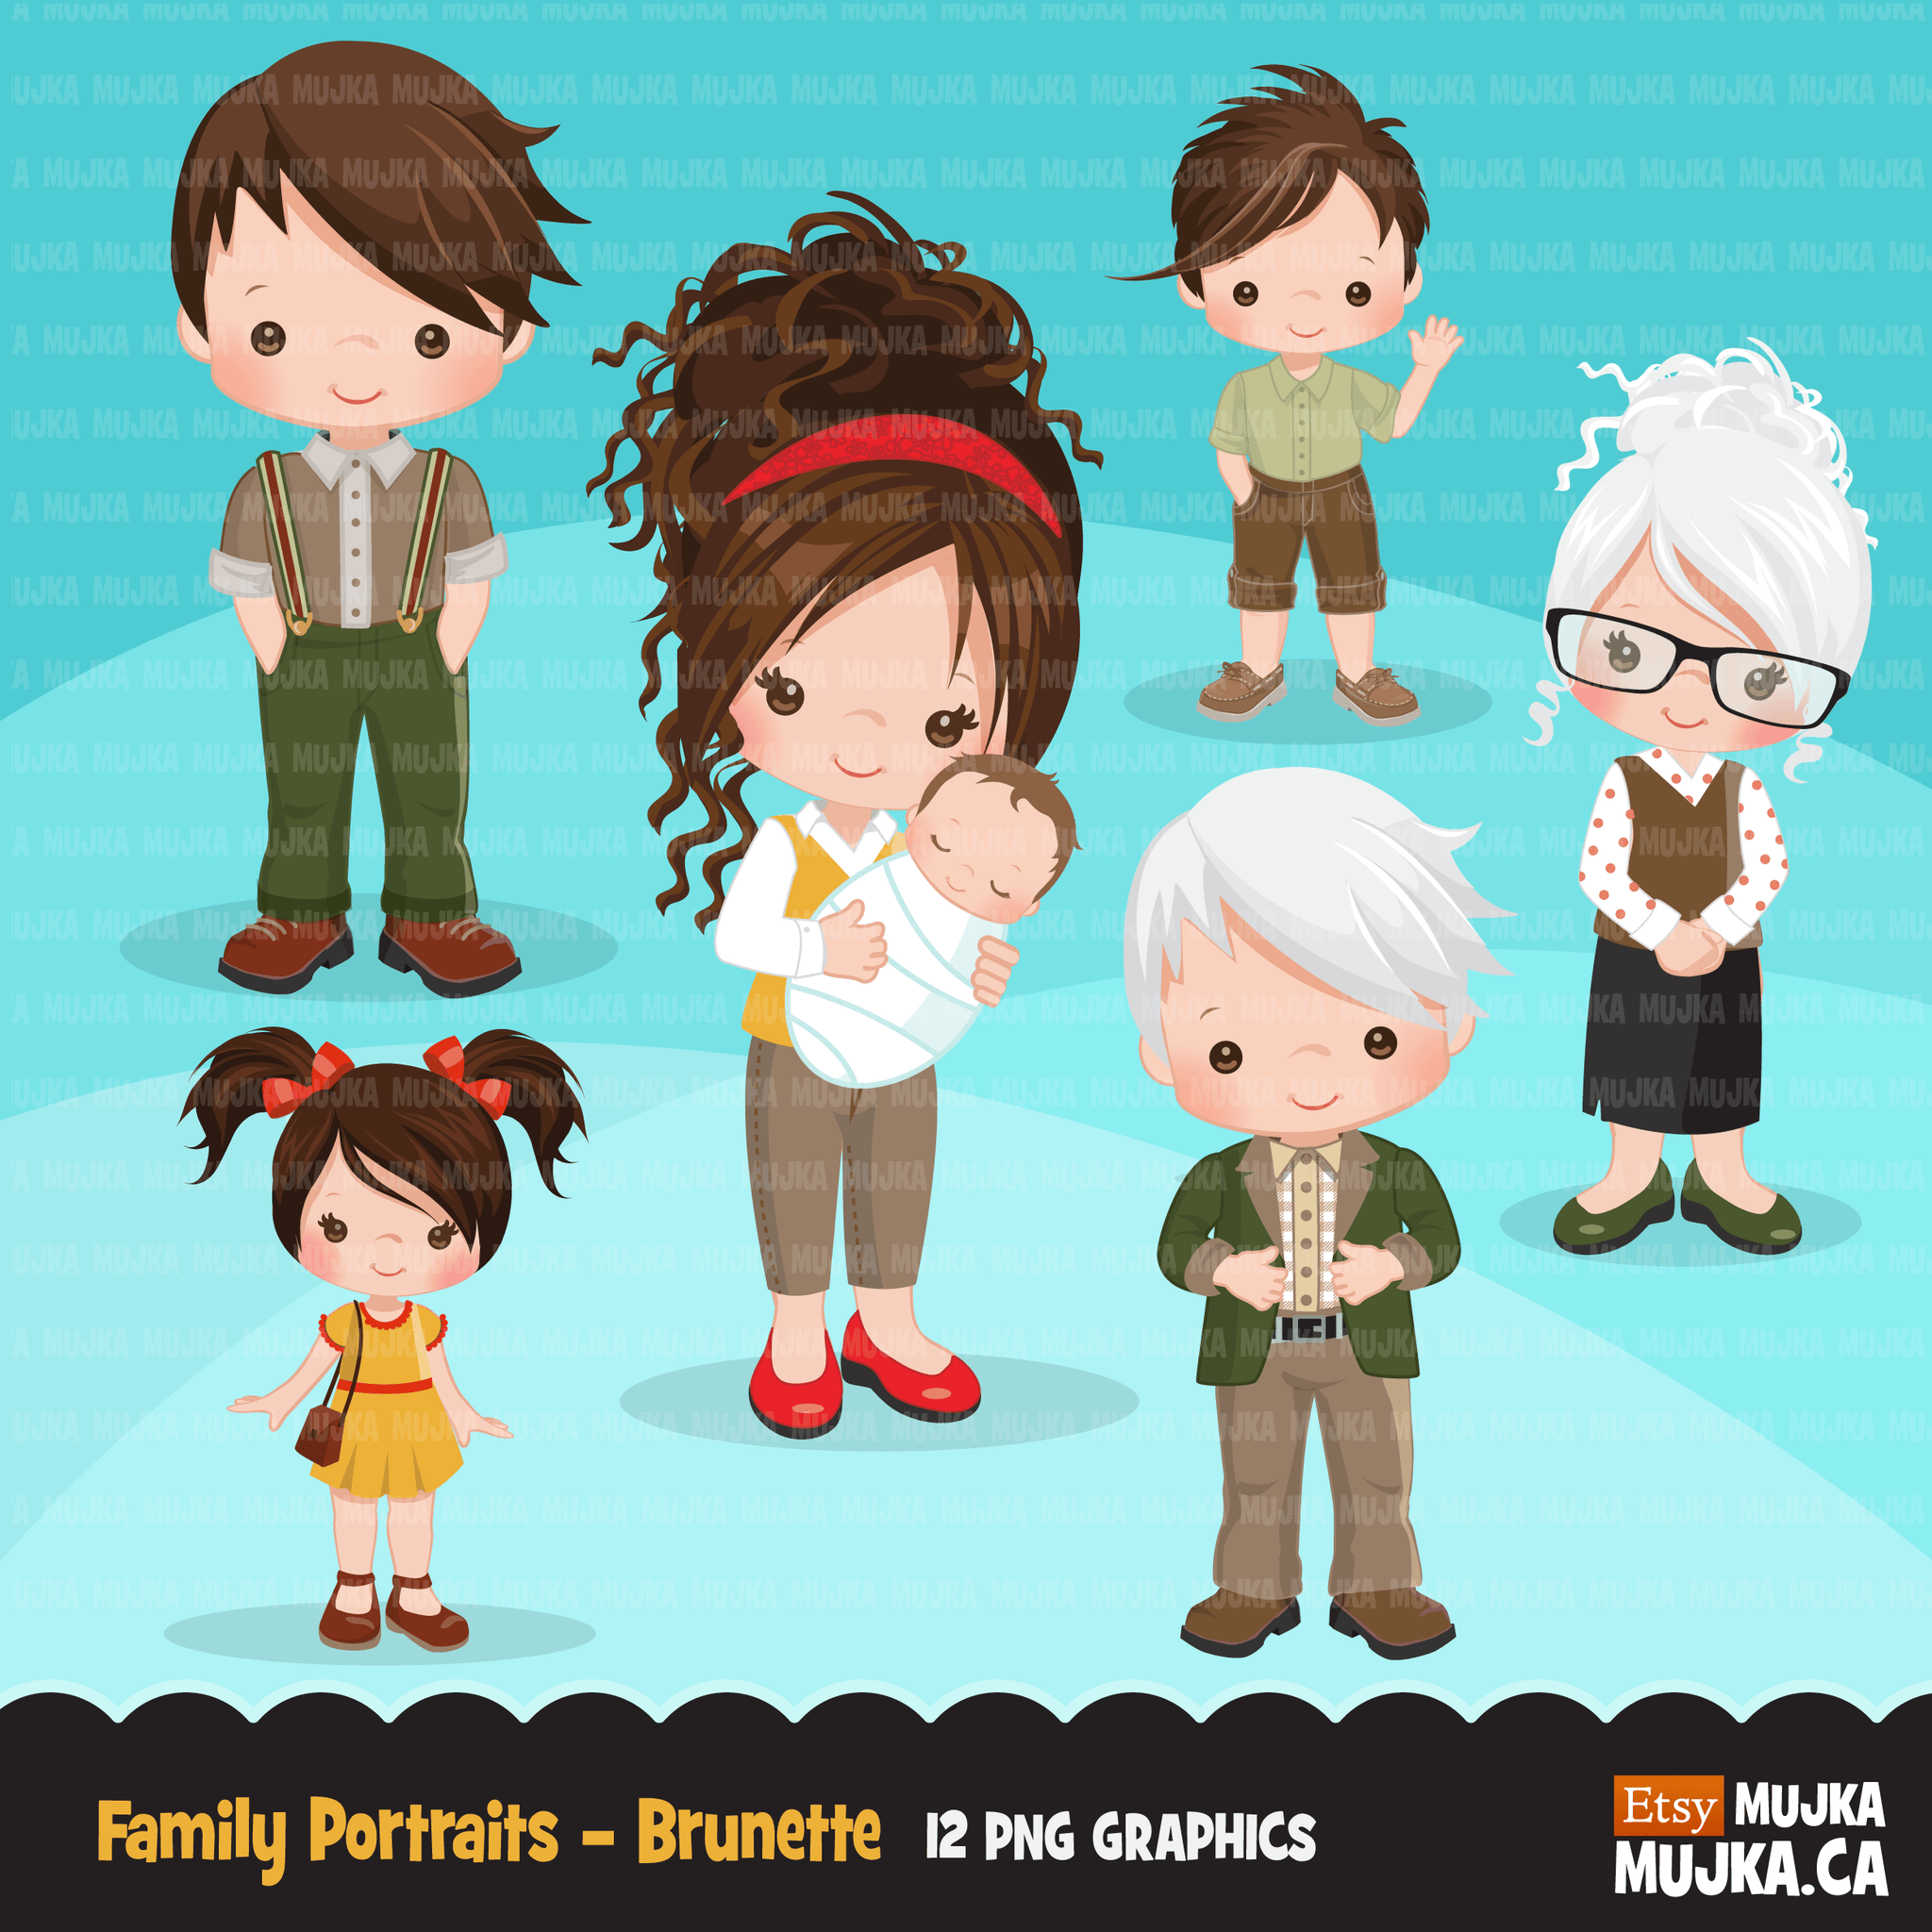 Family clipart Bundle. Collection of mother, father, son, daughter, seniors and accessories graphics. Boy girl